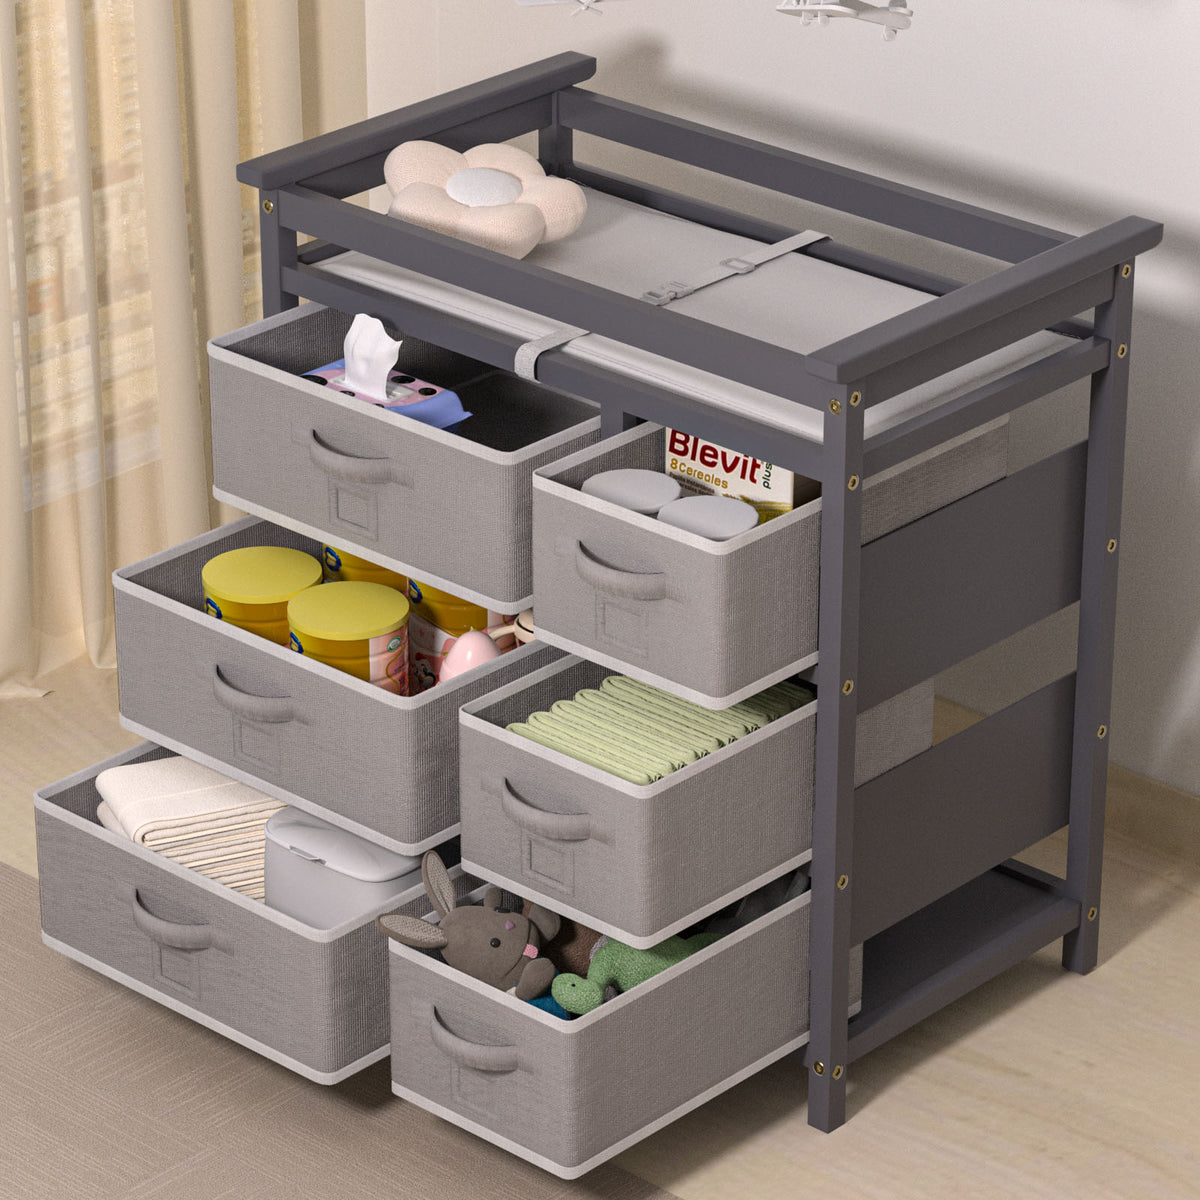 Pre-sale, XJD Baby Changing Table with 6 Storage Baskets, Can be Used as a Changing Table Dresser with Changing Table Top, a Baby Changing Station, Diaper Changing Station (Gray/Grey)